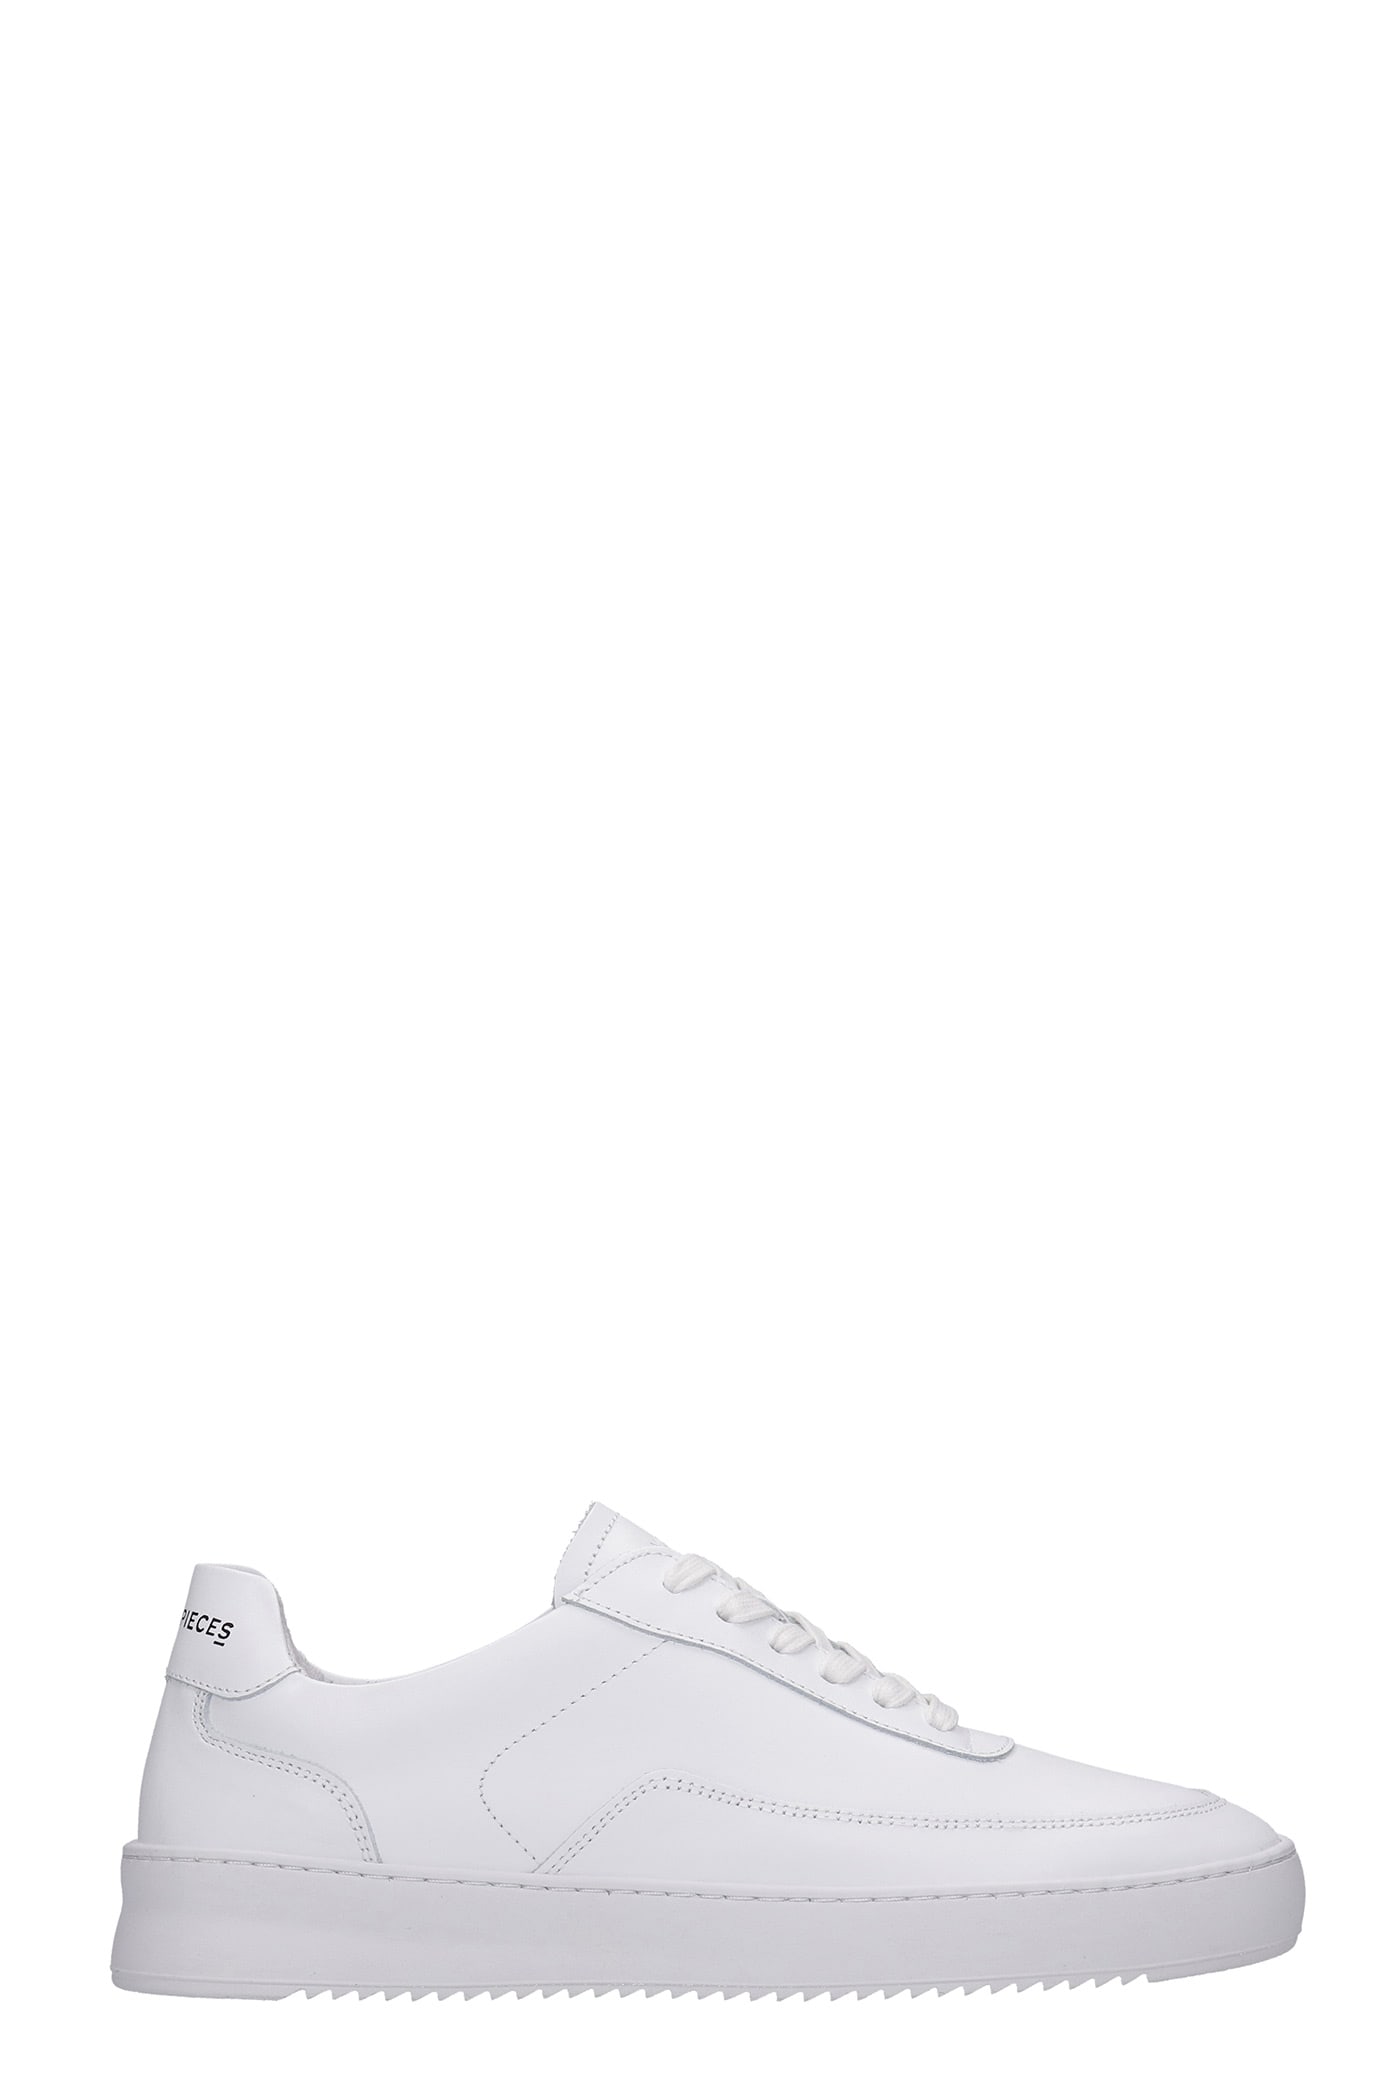 Filling Pieces Mondo 2.0 Ripple Sneakers In White Leather